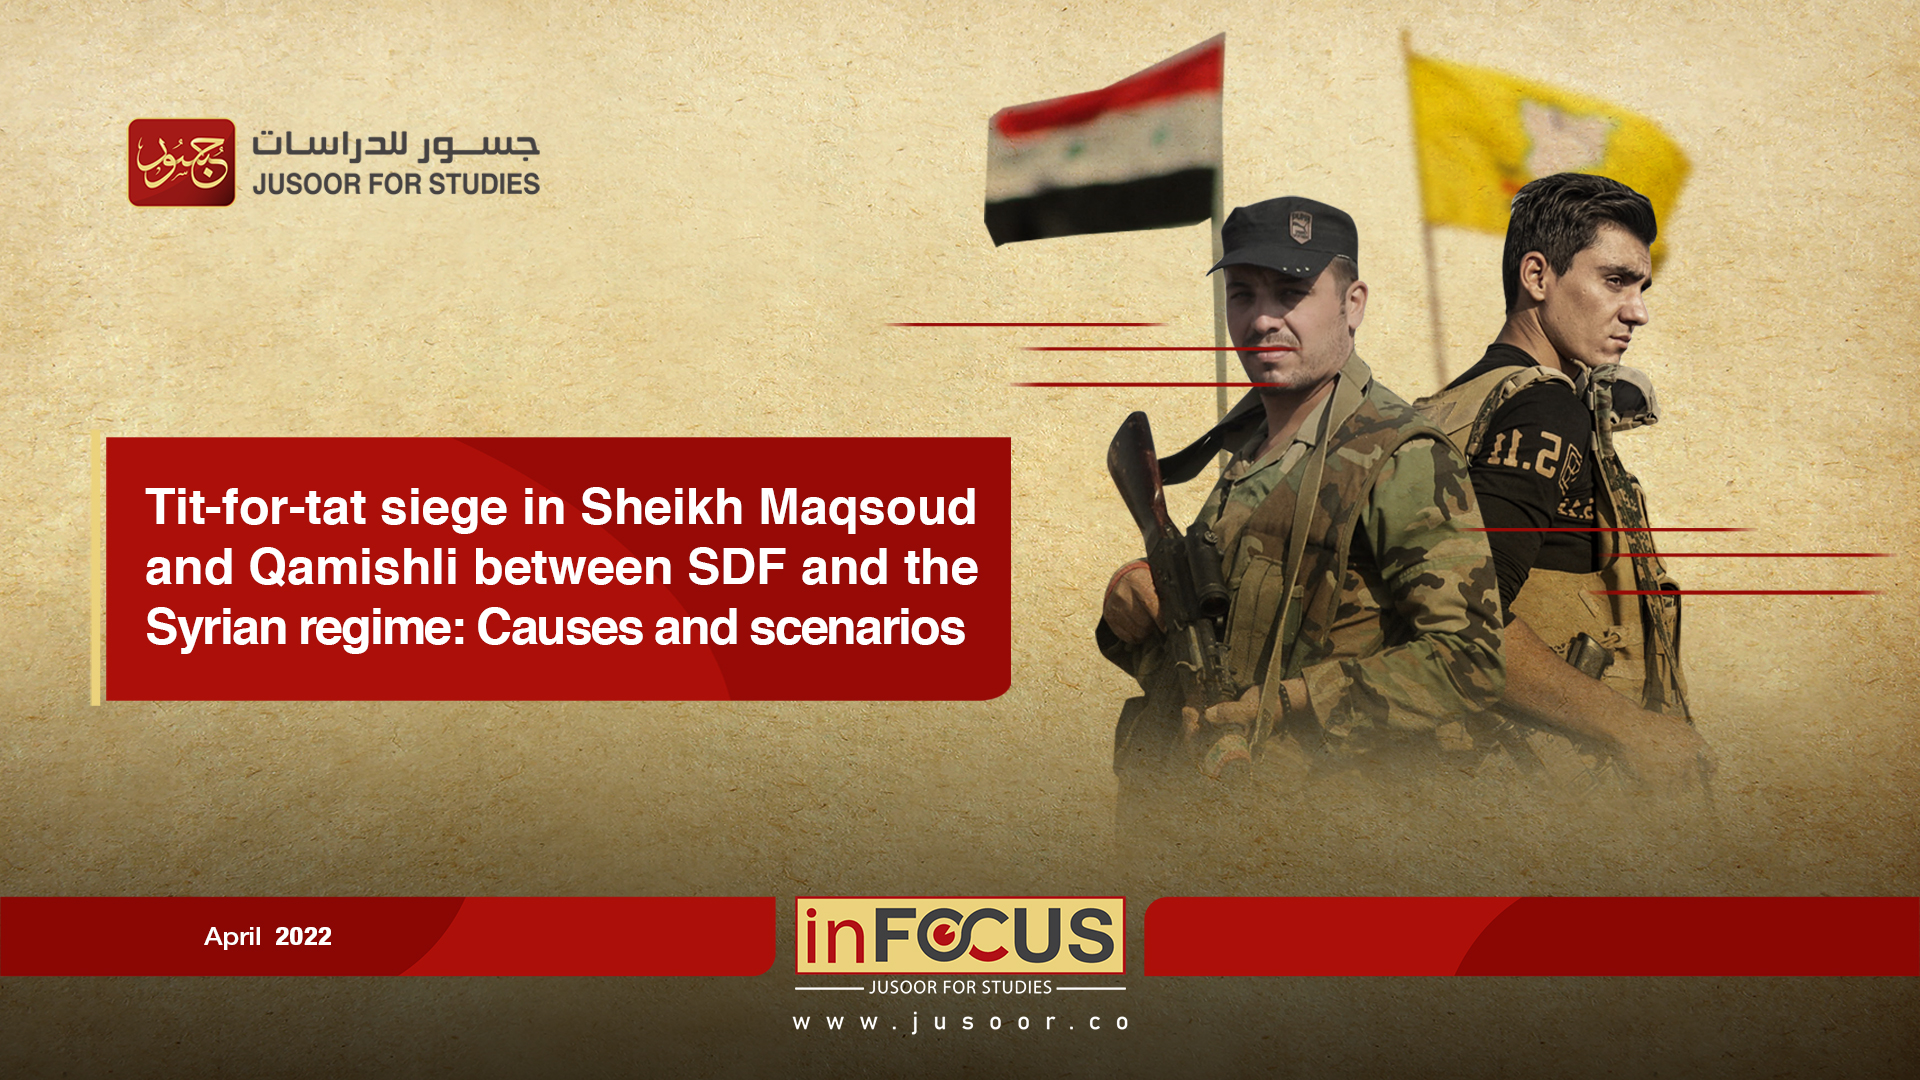 Tit-for-tat siege in Sheikh Maqsoud and Qamishli between SDF and the Syrian regime: Causes and scenarios